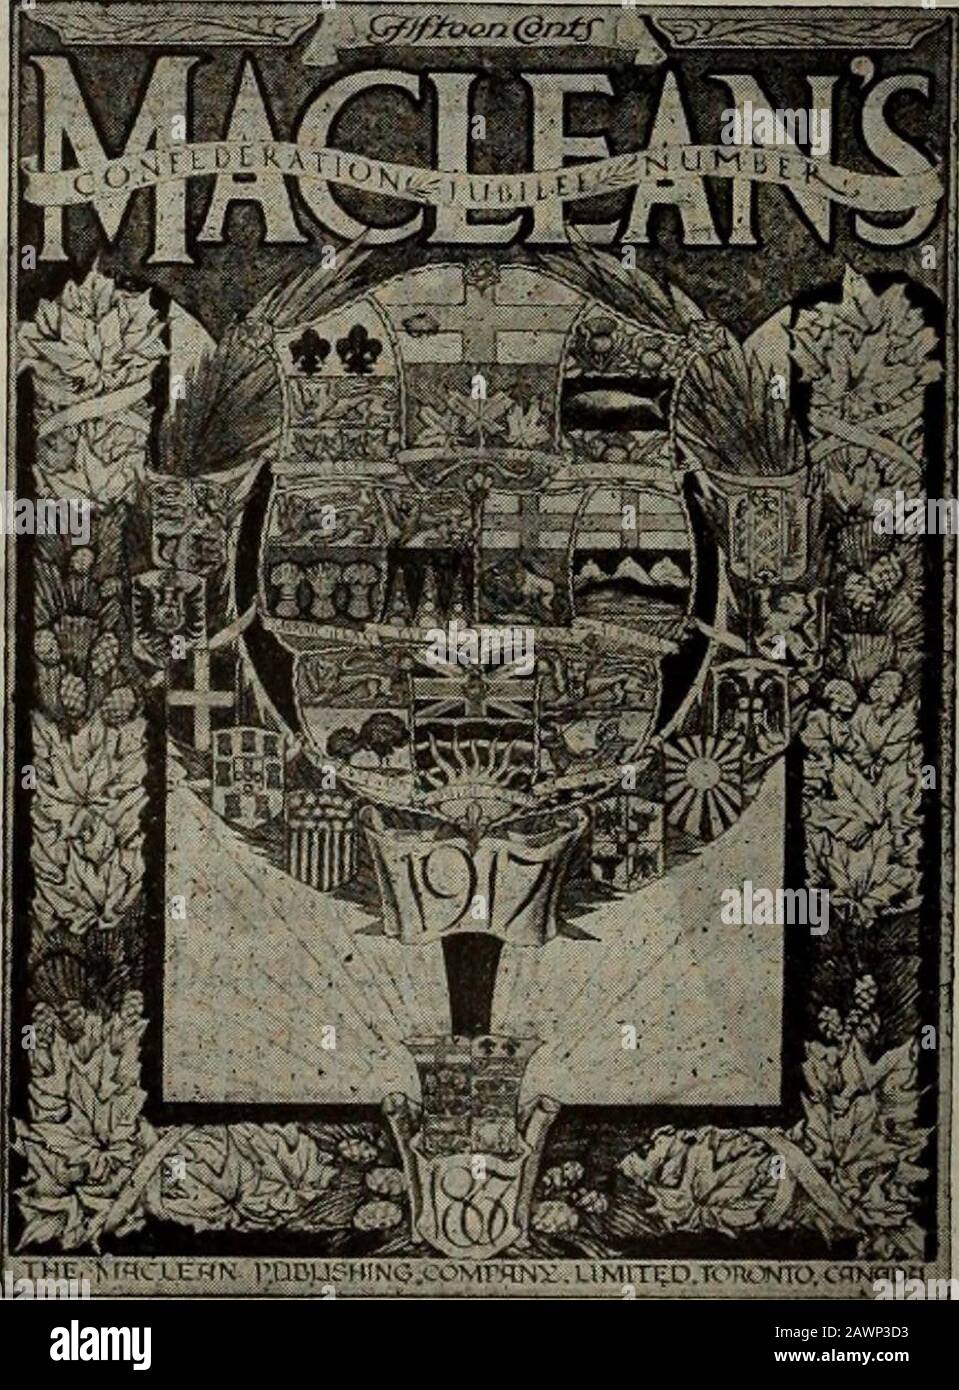 Canadian machinery and metalworking (July-December 1917) . s. Confederation the dominant theme of July MACLEANS THE Jubilee of Confederation hasled the Editor to make the JulyMACLEANS retrospective and in-terpretive of Confederation in the char-acter of its main contents—this to meetthe certain need and desire of theCanadian people. Note the fine pro-vision of special Confederation articleand features: THE MEETING OF MACDONALD AND BROWN. By C W. Jefferys. a frontispiecepainted for MACLEANS. ? THE STORY OF CONFEDERATION.By Thomas Bertram. A colorfulnarrative of the bringing about ofthe union of Stock Photo